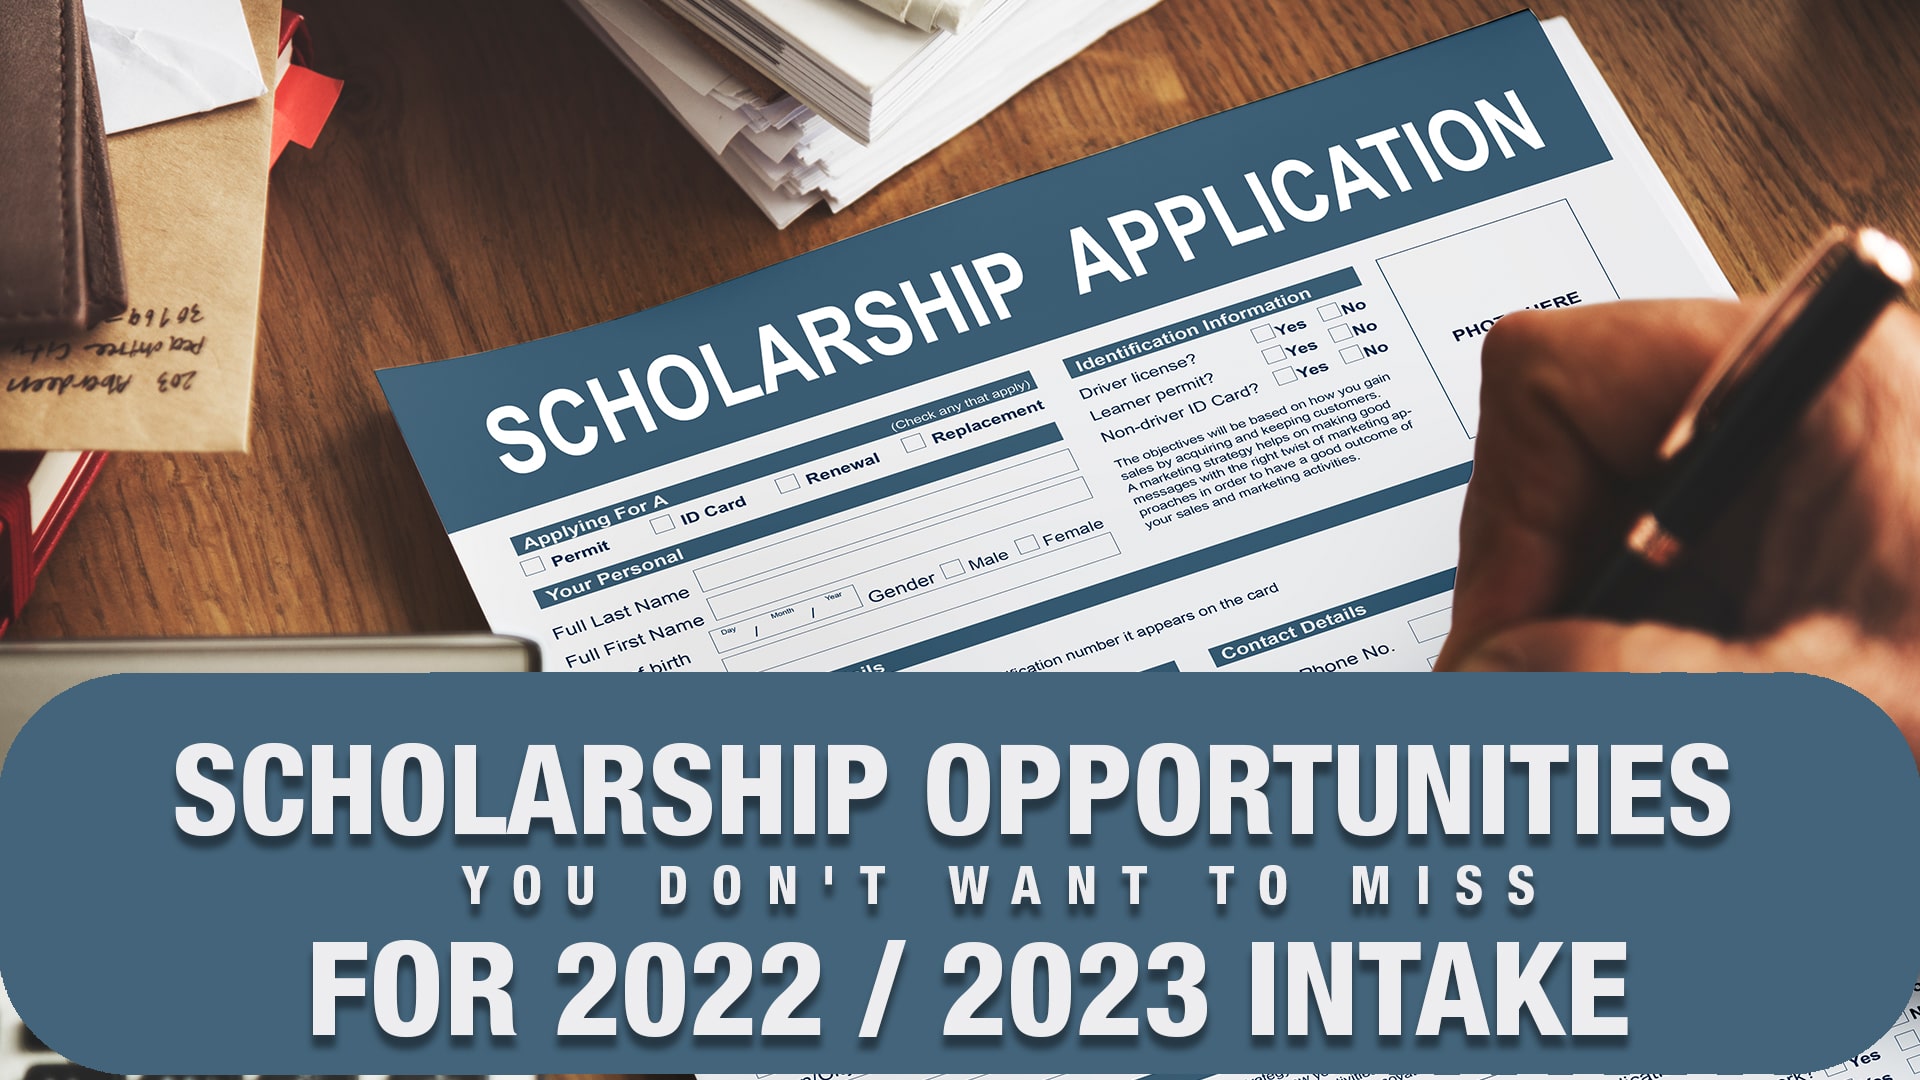 Scholarship Opportunities you don't want to miss for 2022-2023 Intake